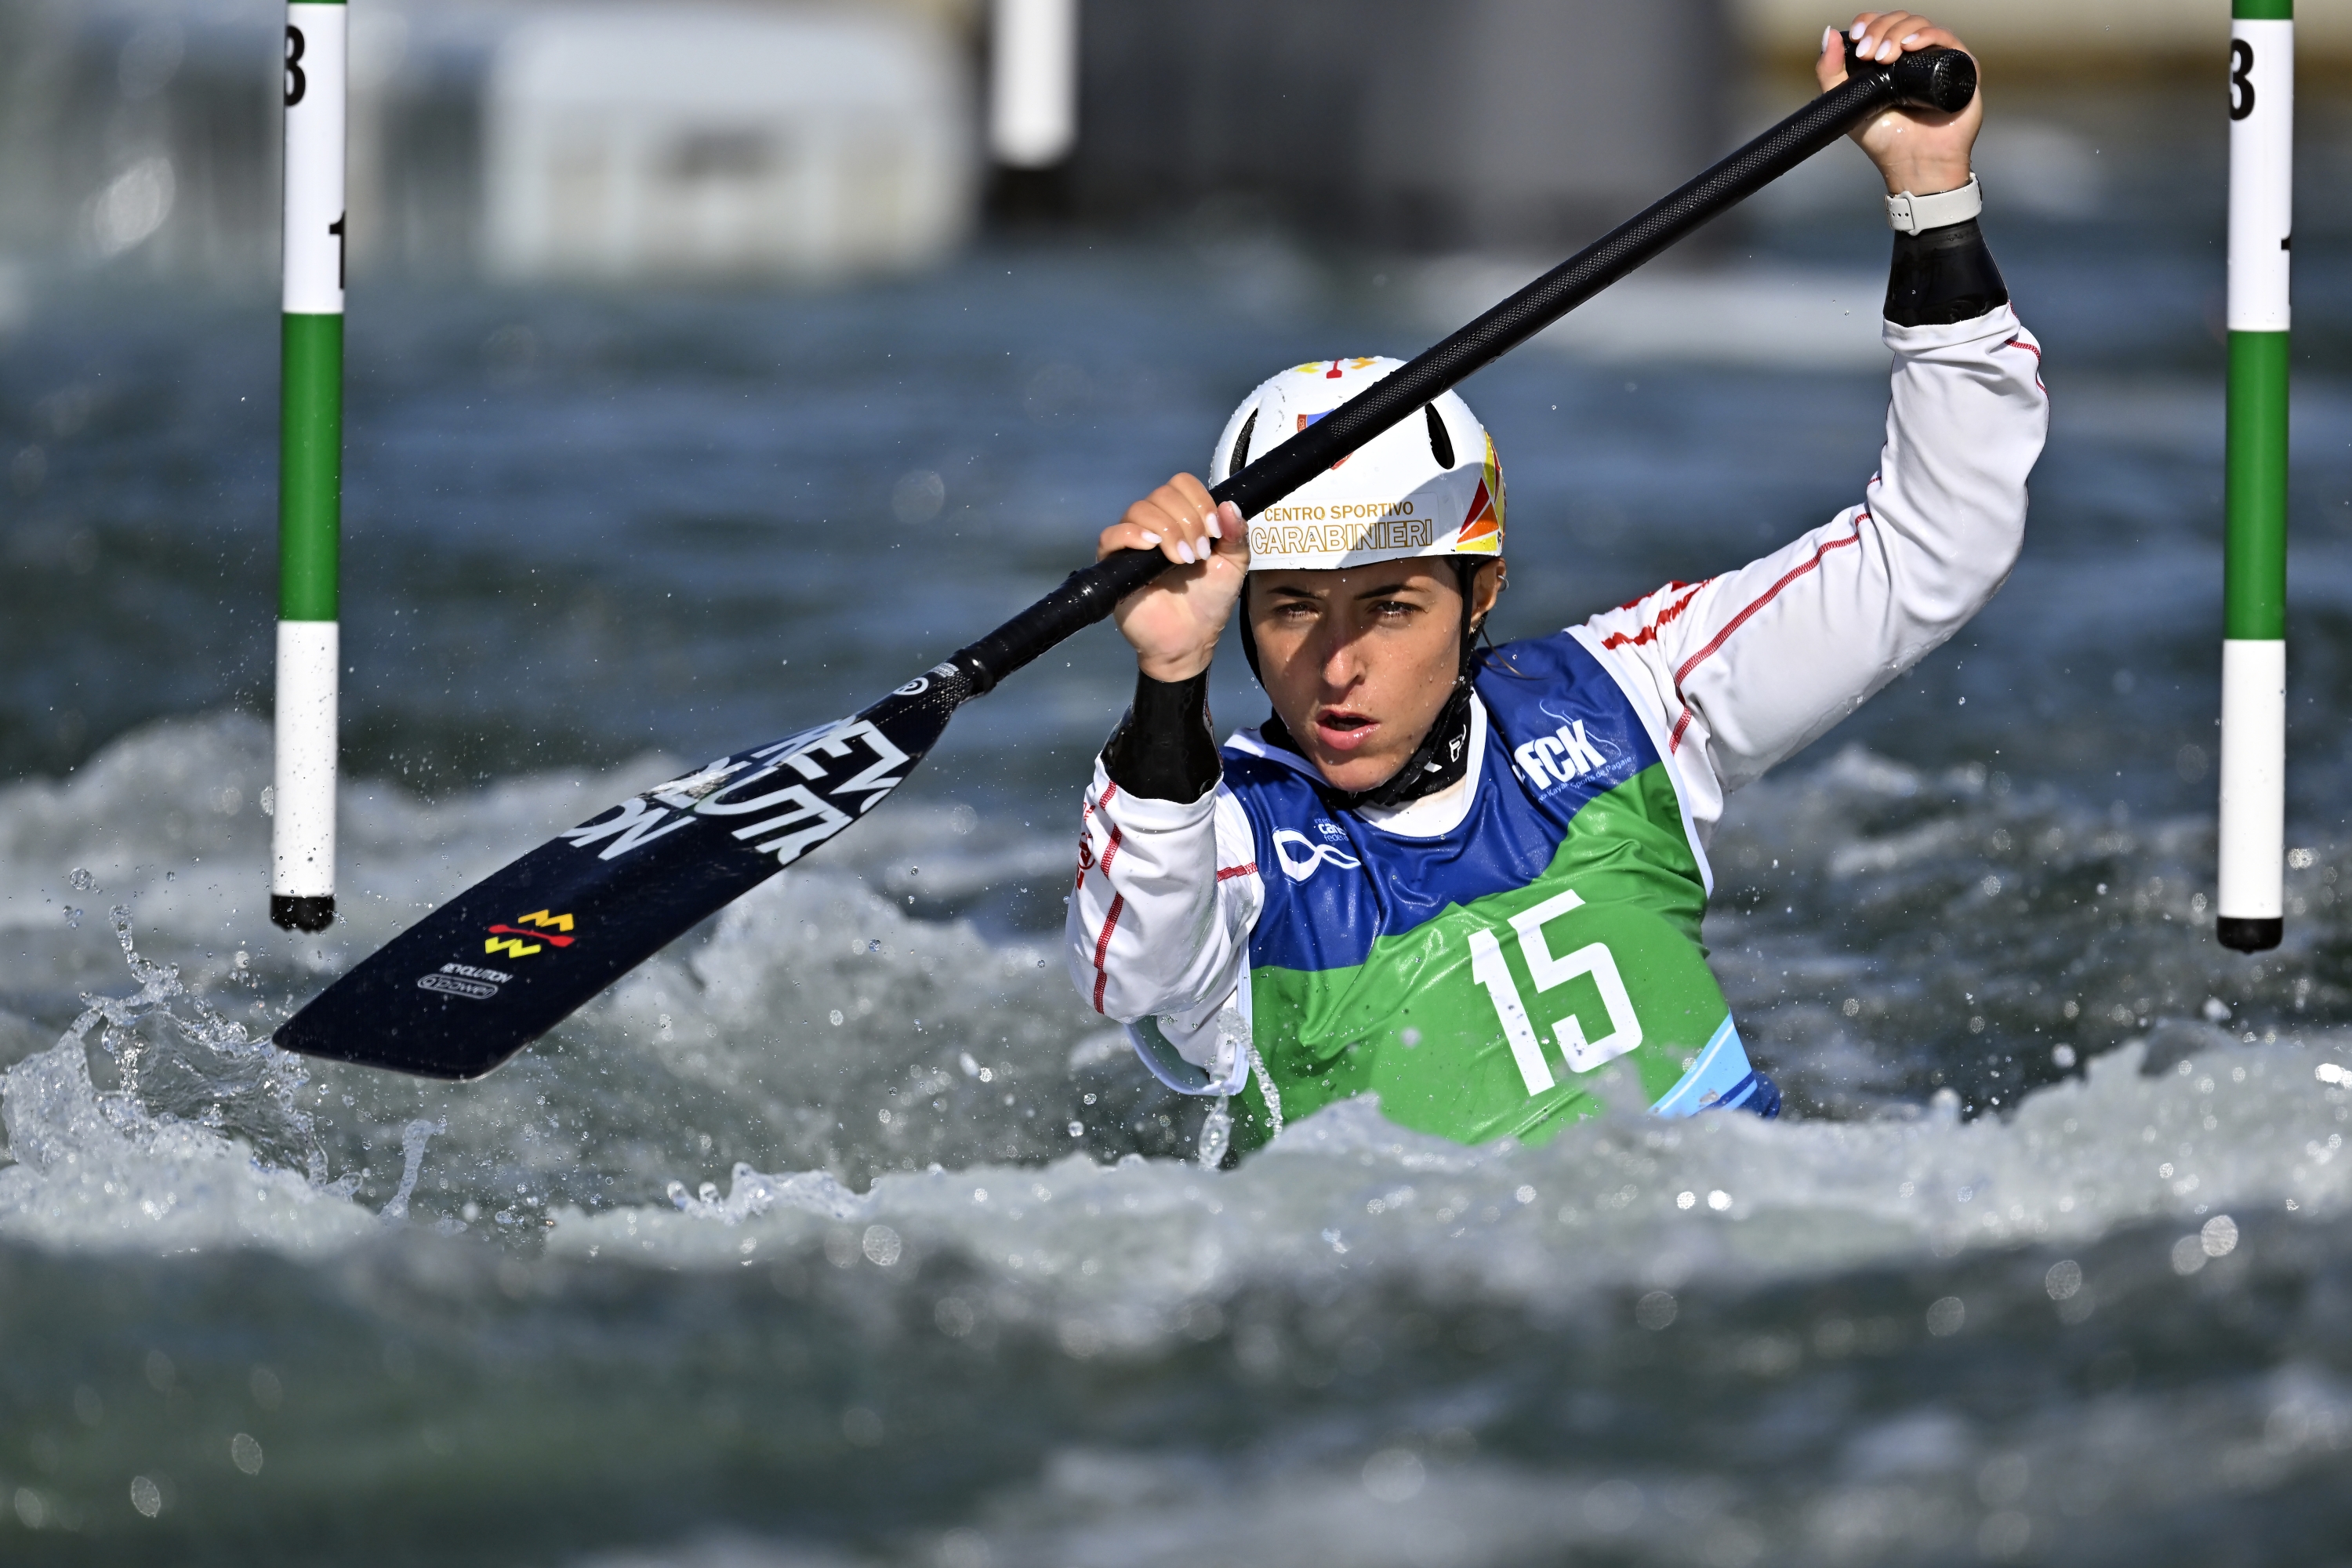 PARIS, FRANCE - OCTOBER 06: Marta Bertoncelli of Italy competes in the Women's Canoe Single during the 2023 ICF Canoe Slalom World Cup slalom at Vaires-Sur-Marne Nautical Stadium on October 06, 2023 in Paris, France. (Photo by Aurelien Meunier/Getty Images)